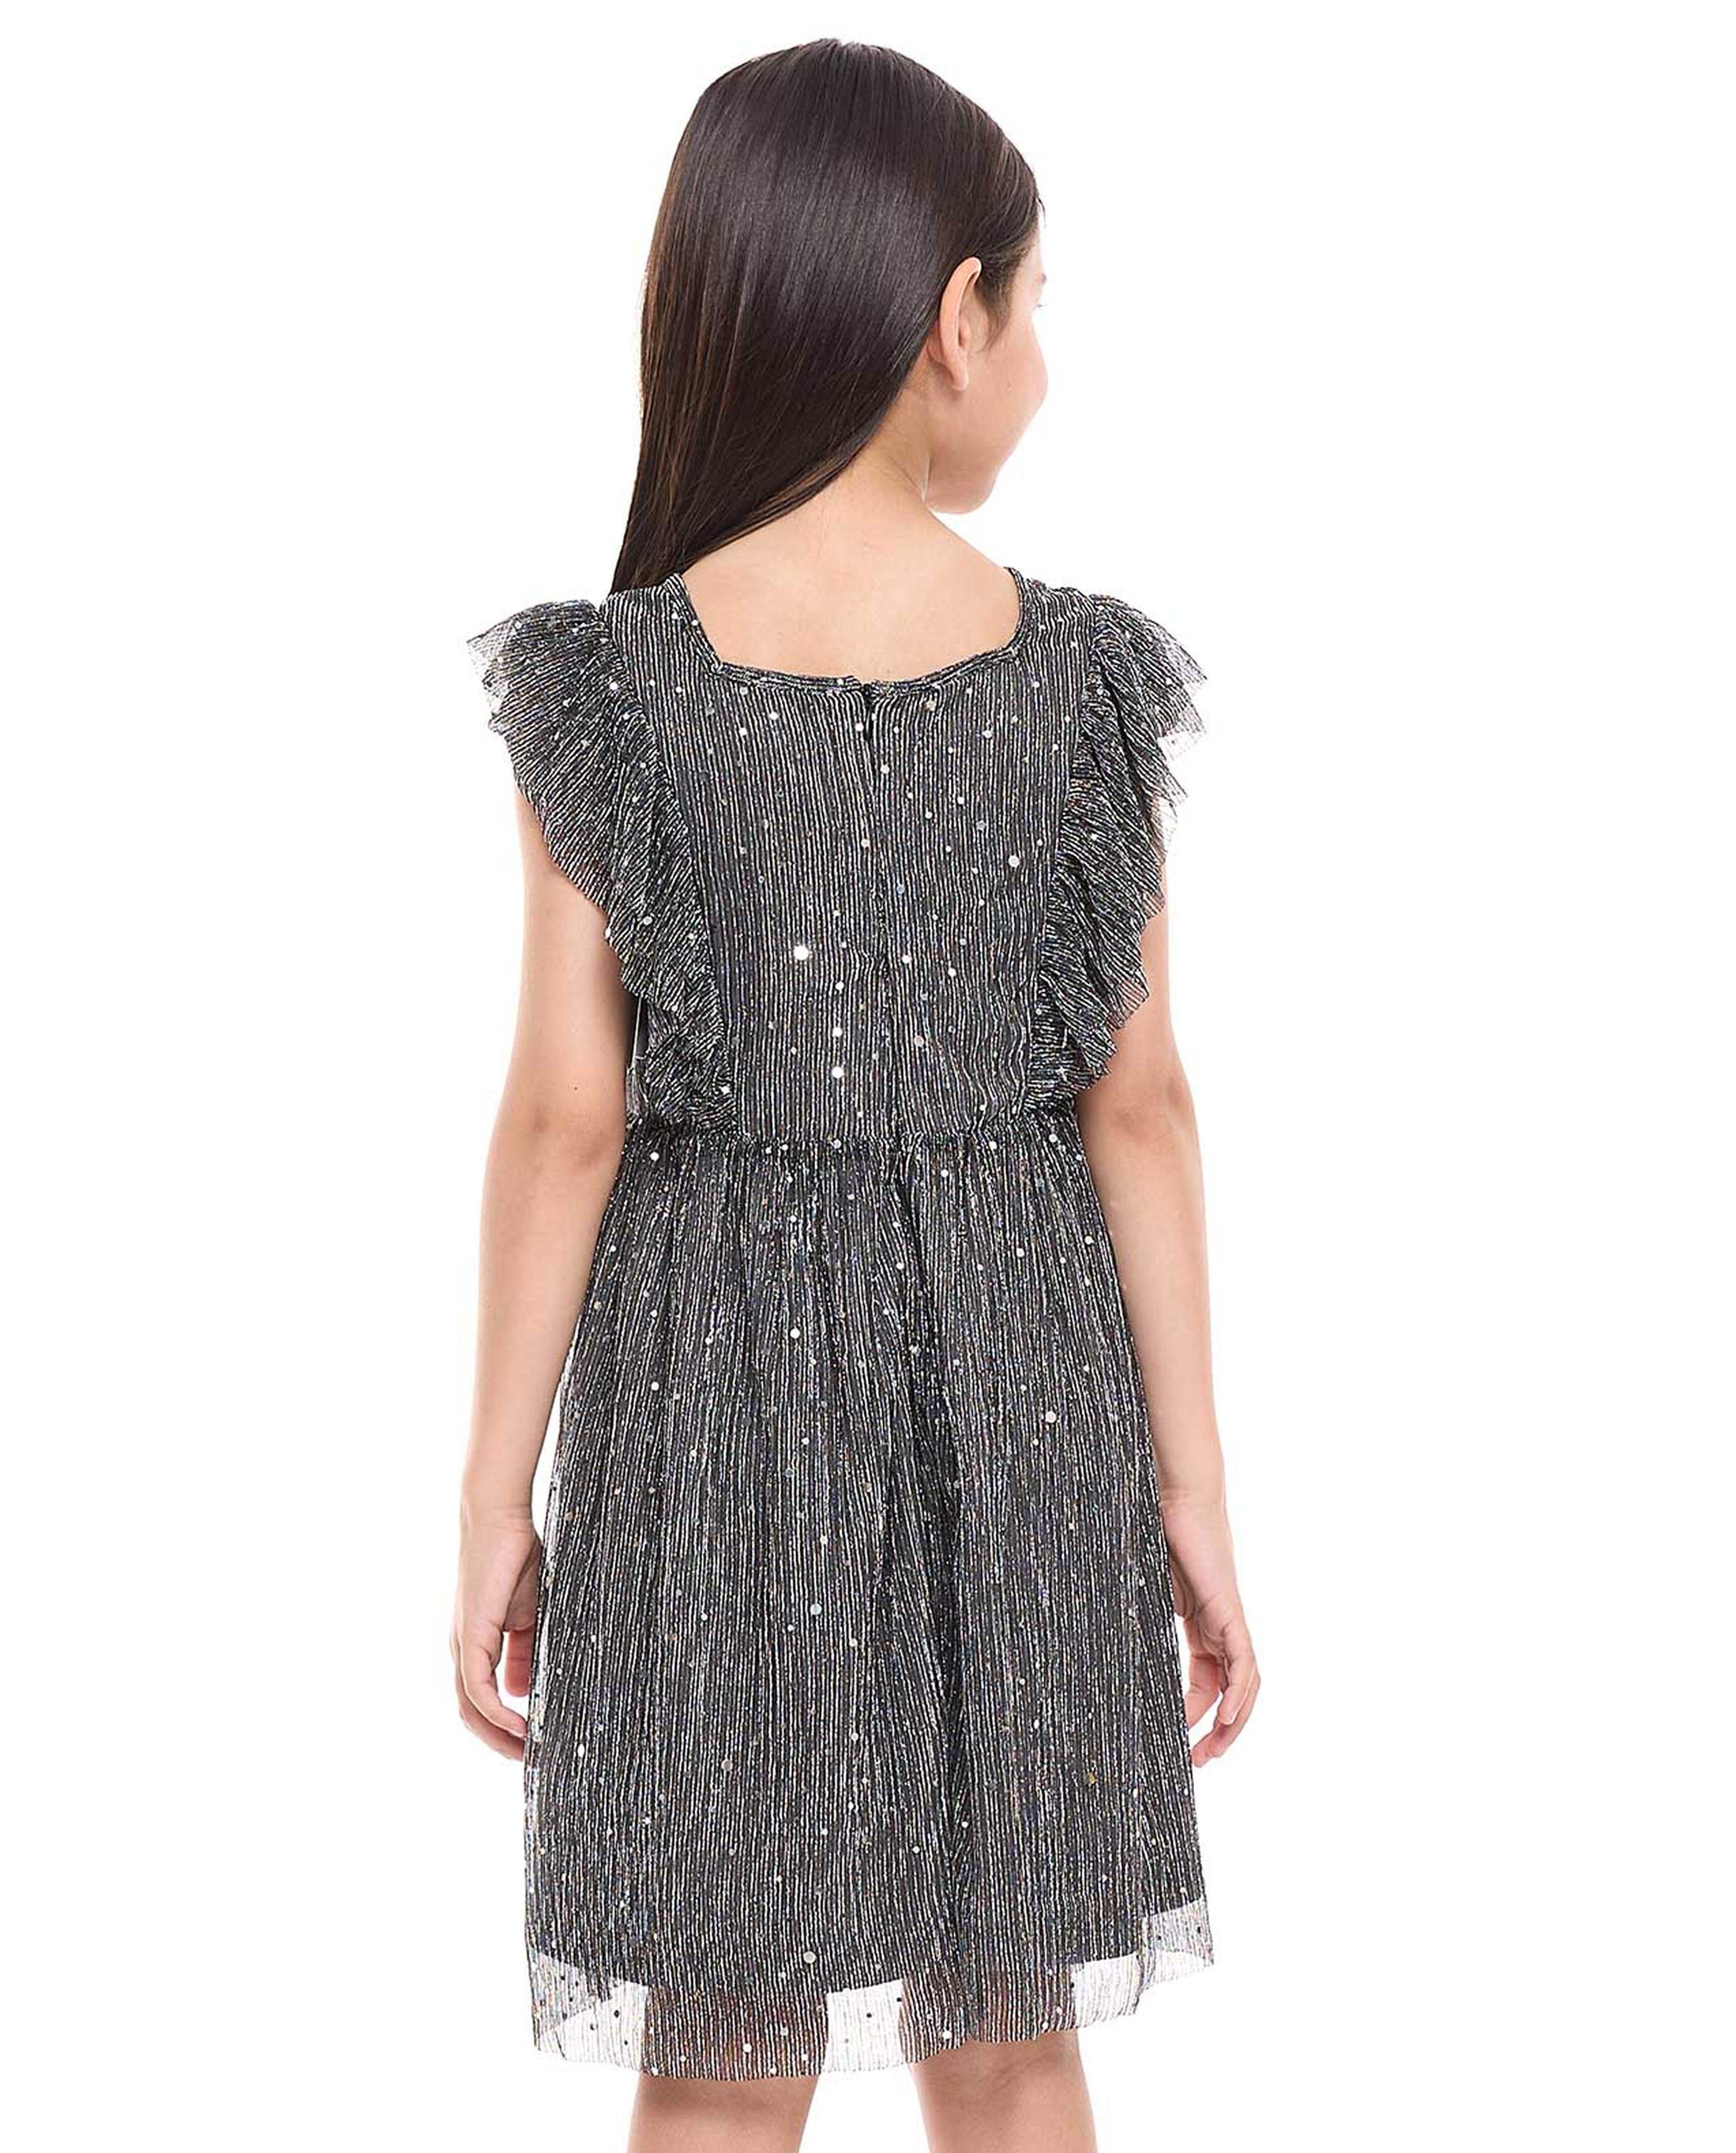 Embellished Fit and Flare Dress with Square Neck and Flutter Sleeves